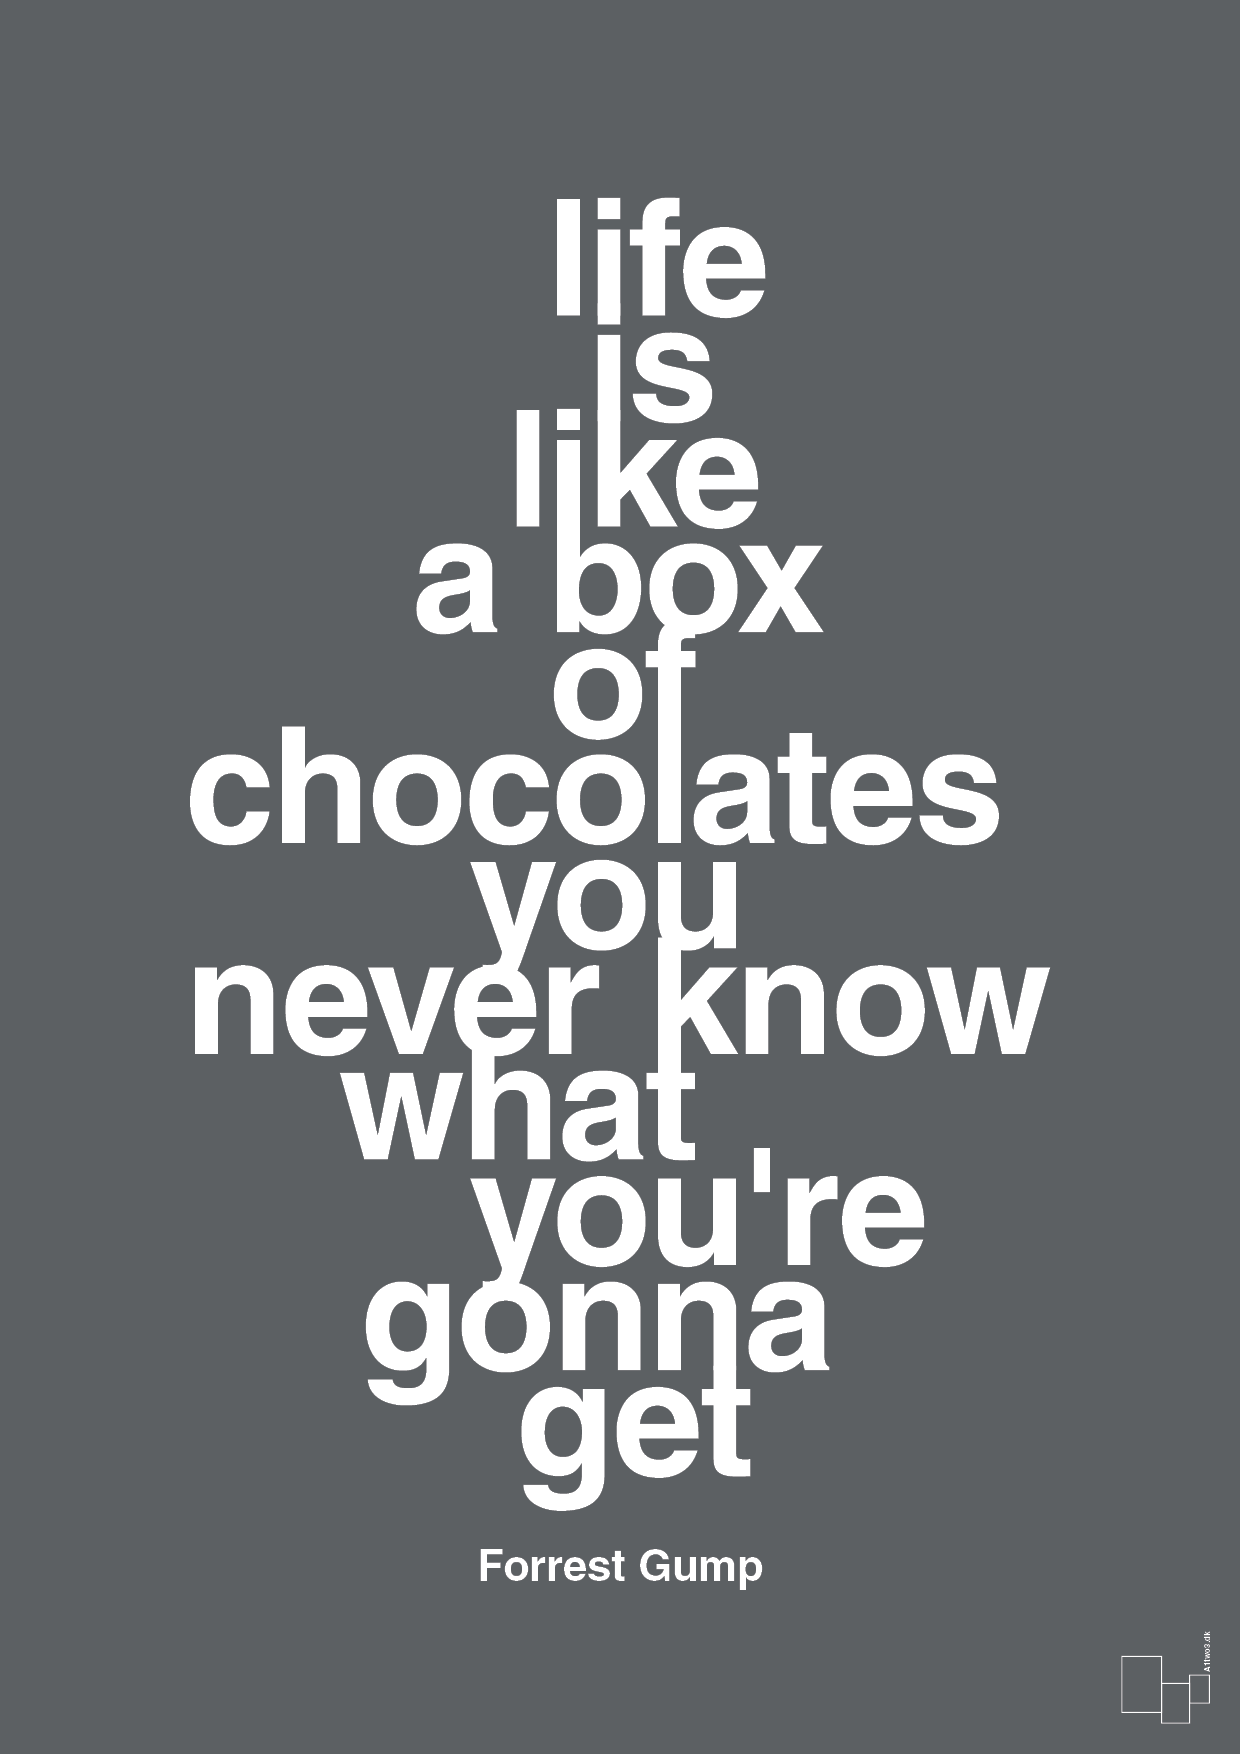 life is like a box of chocolates you never know what you're gonna get - Plakat med Citater i Graphic Charcoal